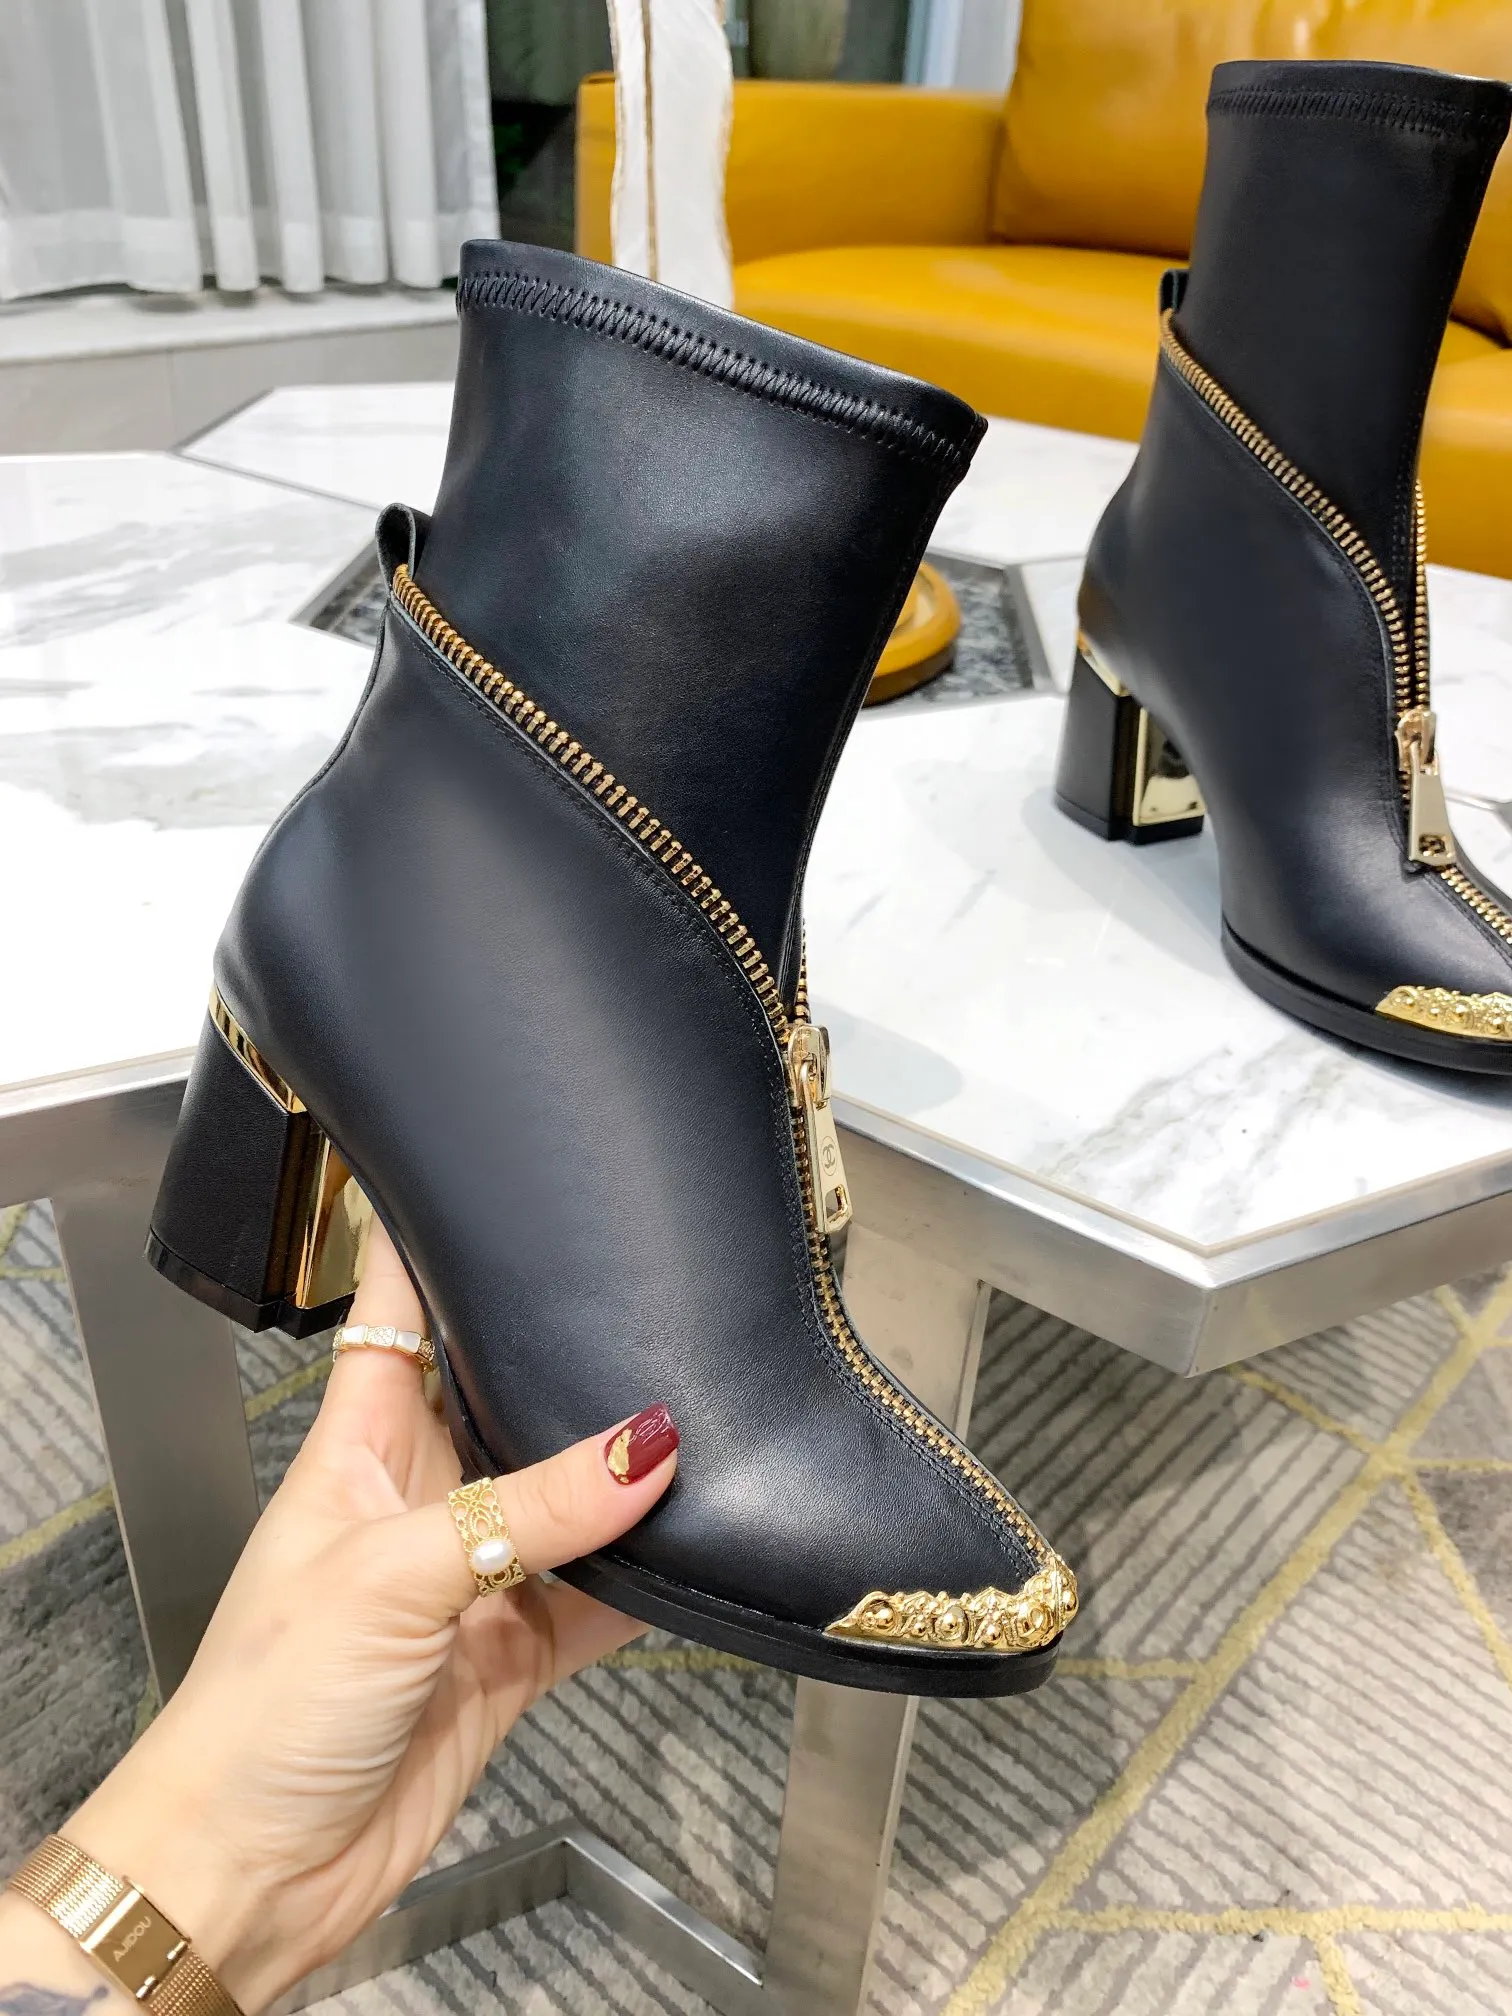 Designer Ankle Boots Luxury Women Martin Booties Gold Metal Chains Decoration Side Zipper Leather Kitten Heel Boot Long Short Tube Series Fashion